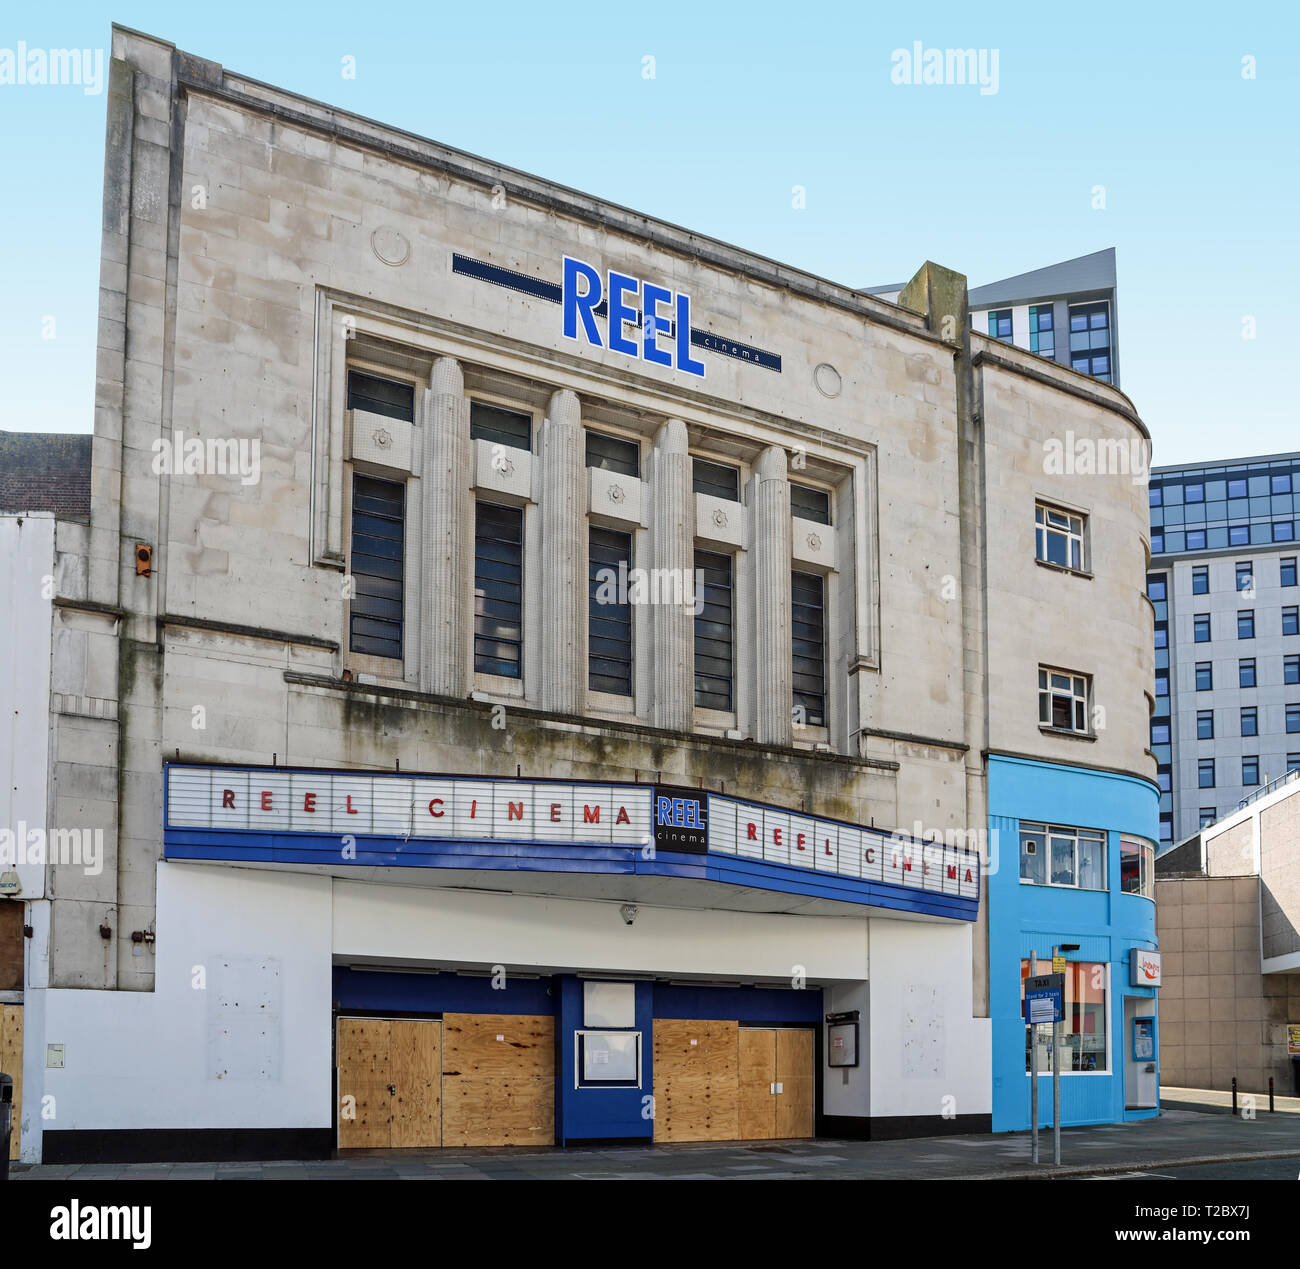 Reel Cinema, formerly ABC cinema, Royal Cinema, Canon Cinema. Cinema and concert venue. Royal Cinema Trust have plans to bring it back to life Stock Photo